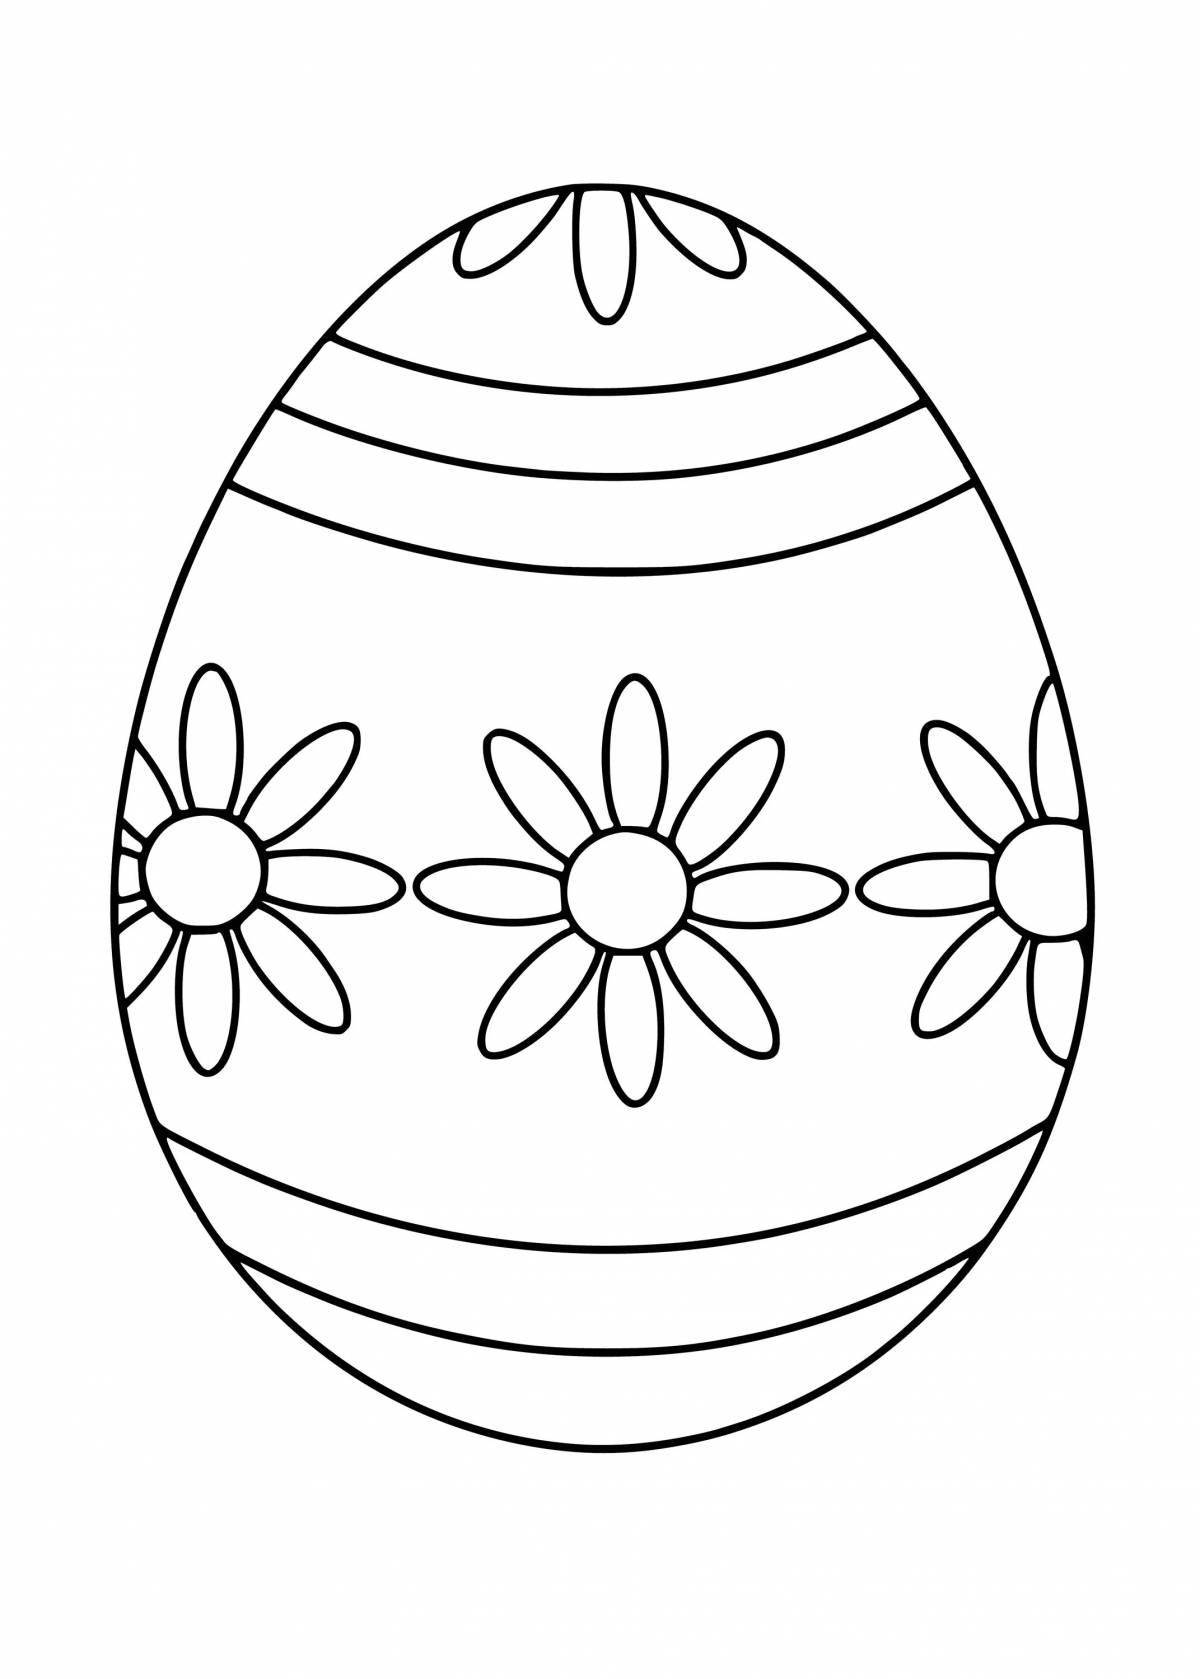 Colorful egg coloring activity